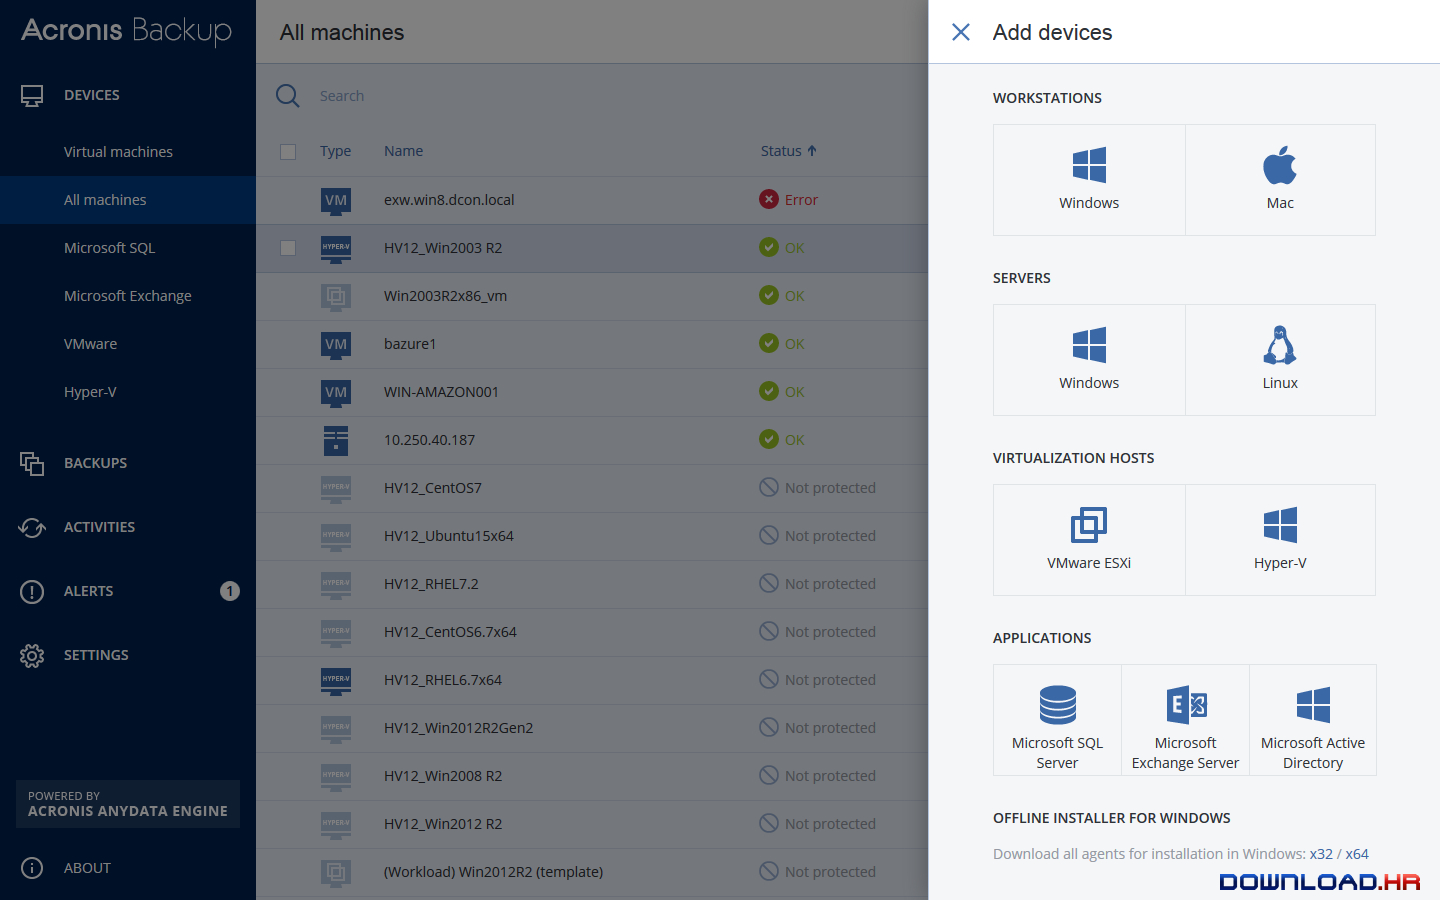 Acronis Backup Standard 12.5.1.14330 12.5.1.14330 Featured Image for Version 12.5.1.14330